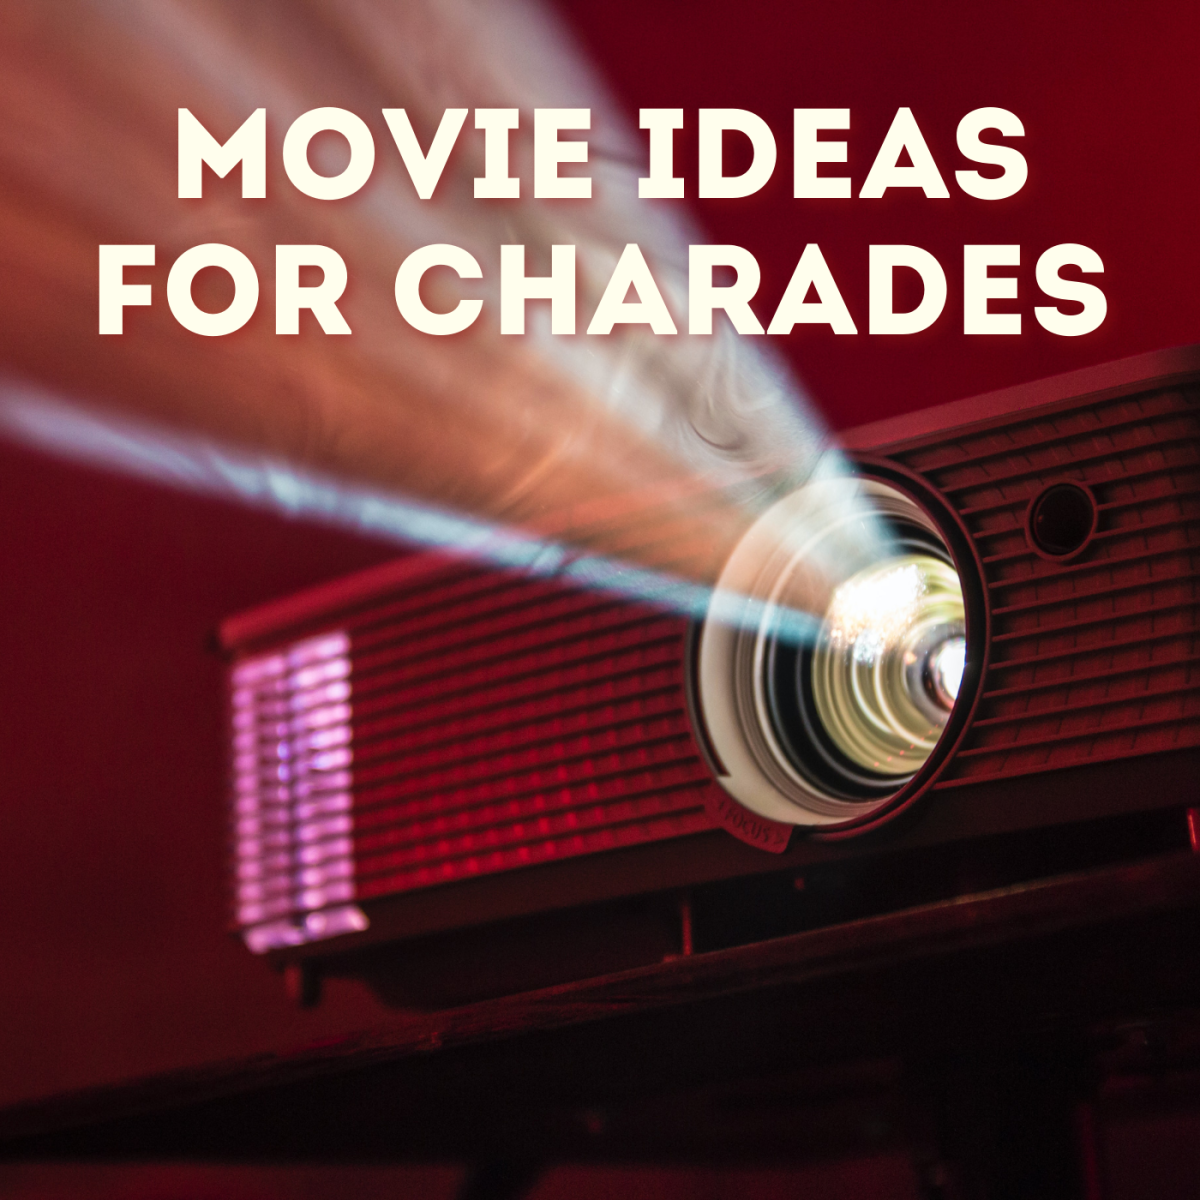 Charades Ideas: Movie and Film Titles